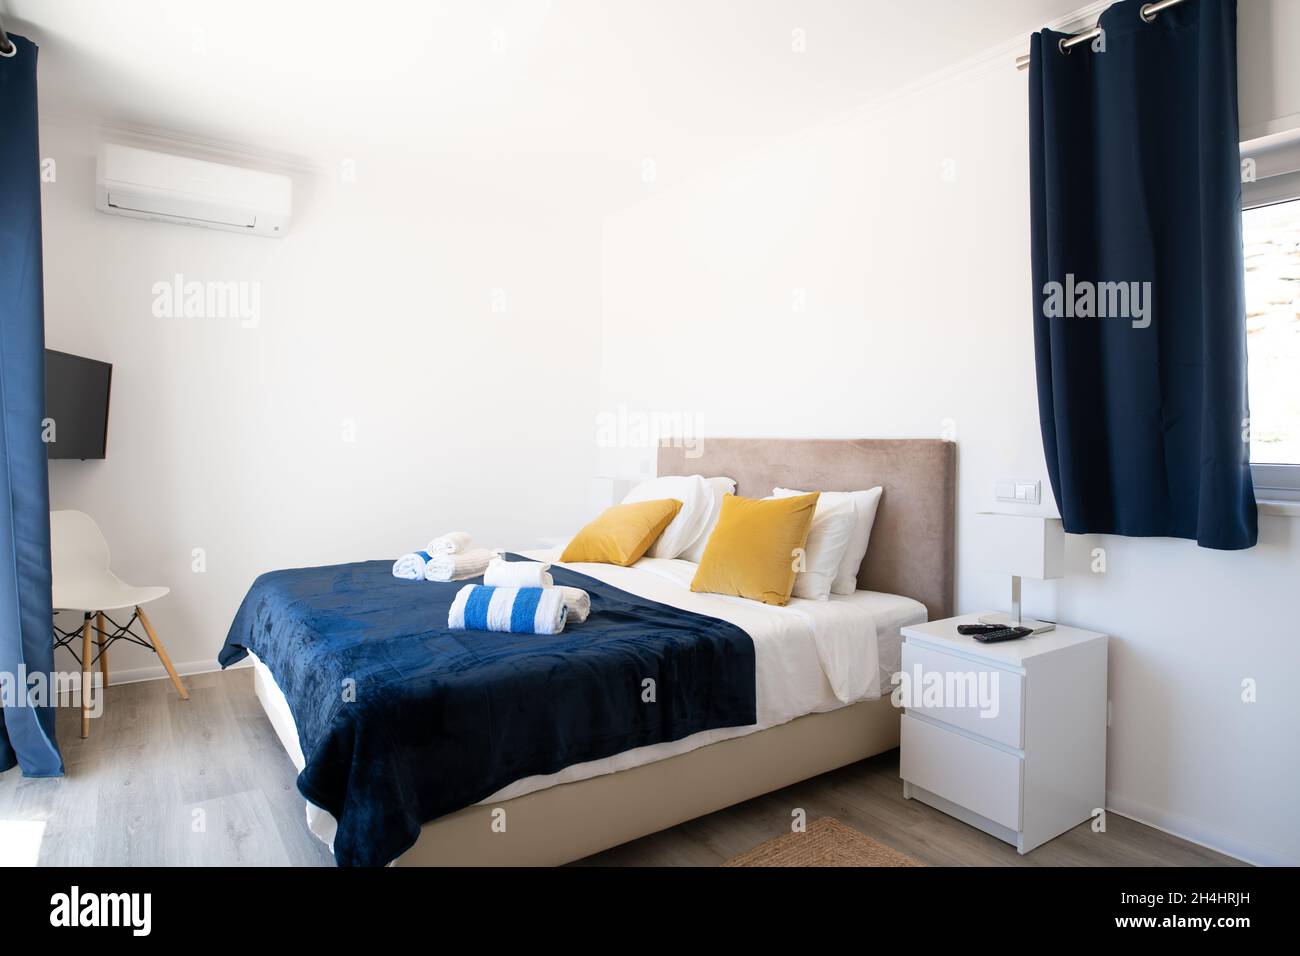 Double bed with blue throw, yellow cushions and white beding Stock Photo